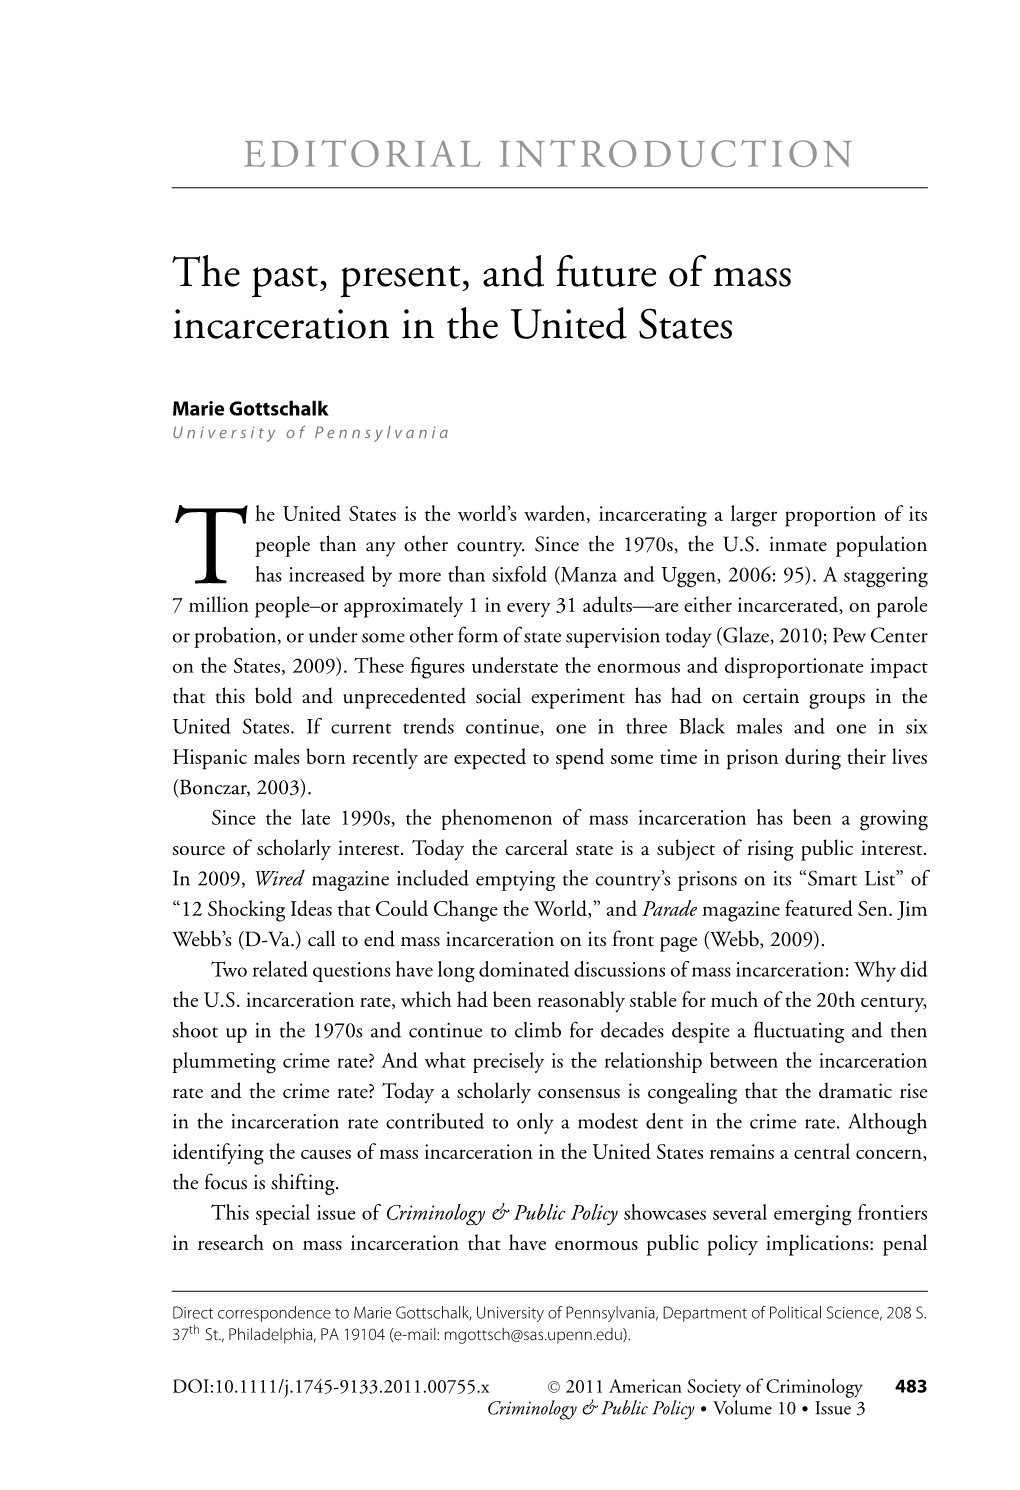 The Past, Present, and Future of Mass Incarceration in the United States